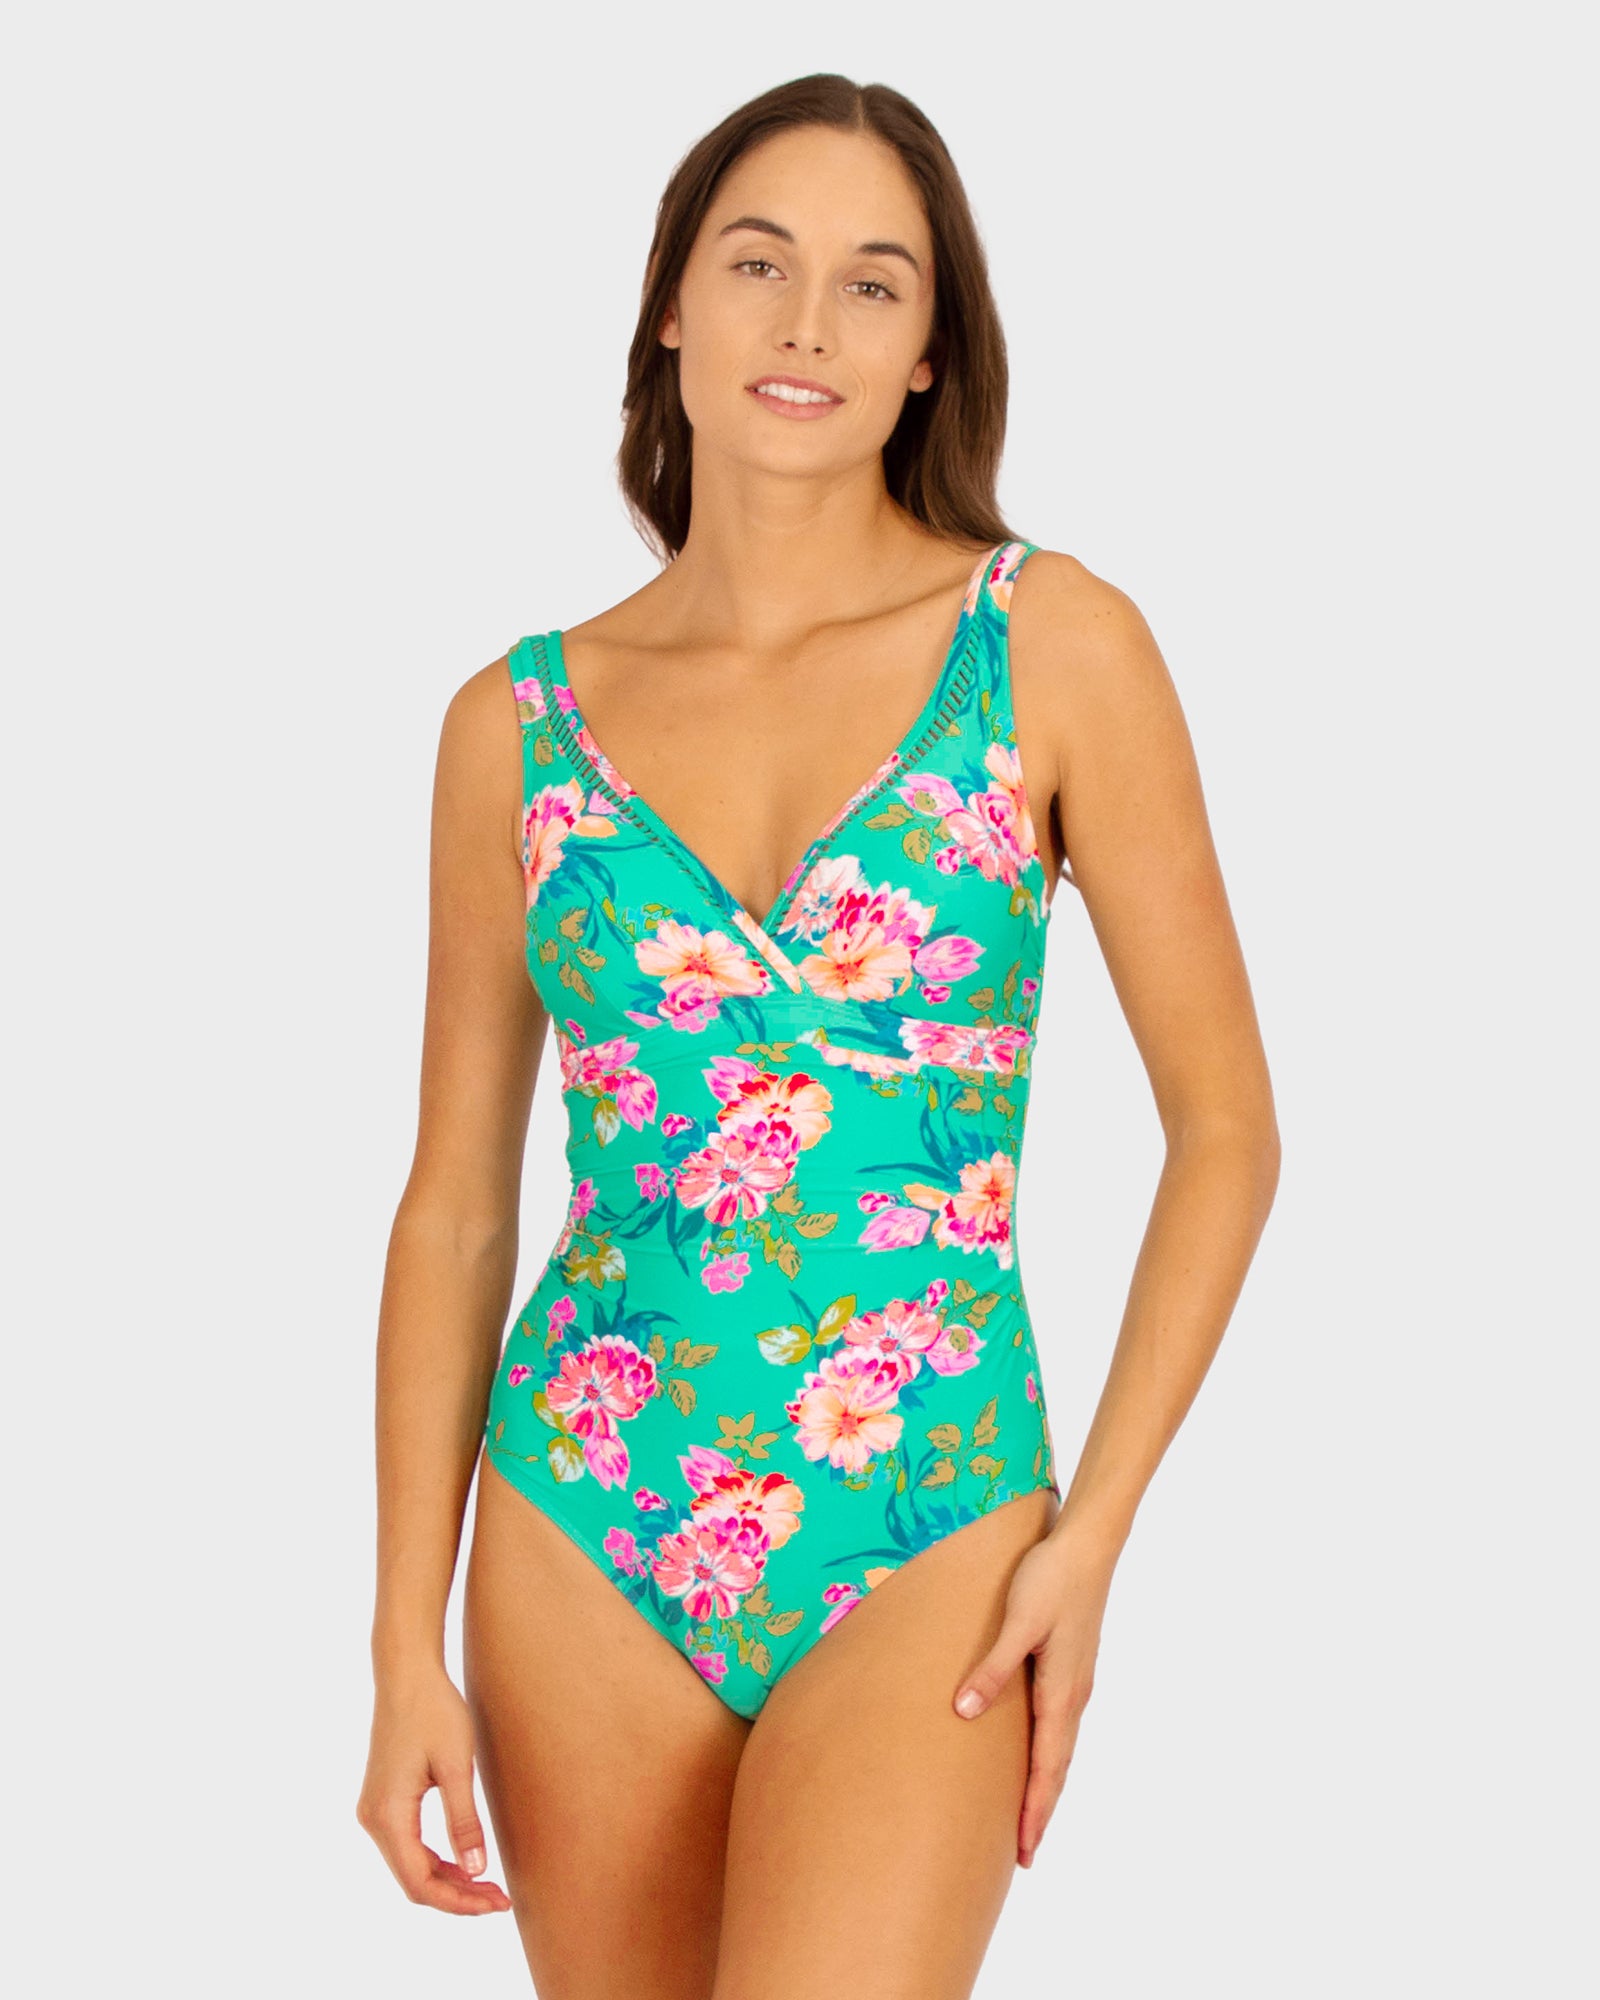 PARADISO E/F CUP ONE PIECE SWIMSUIT